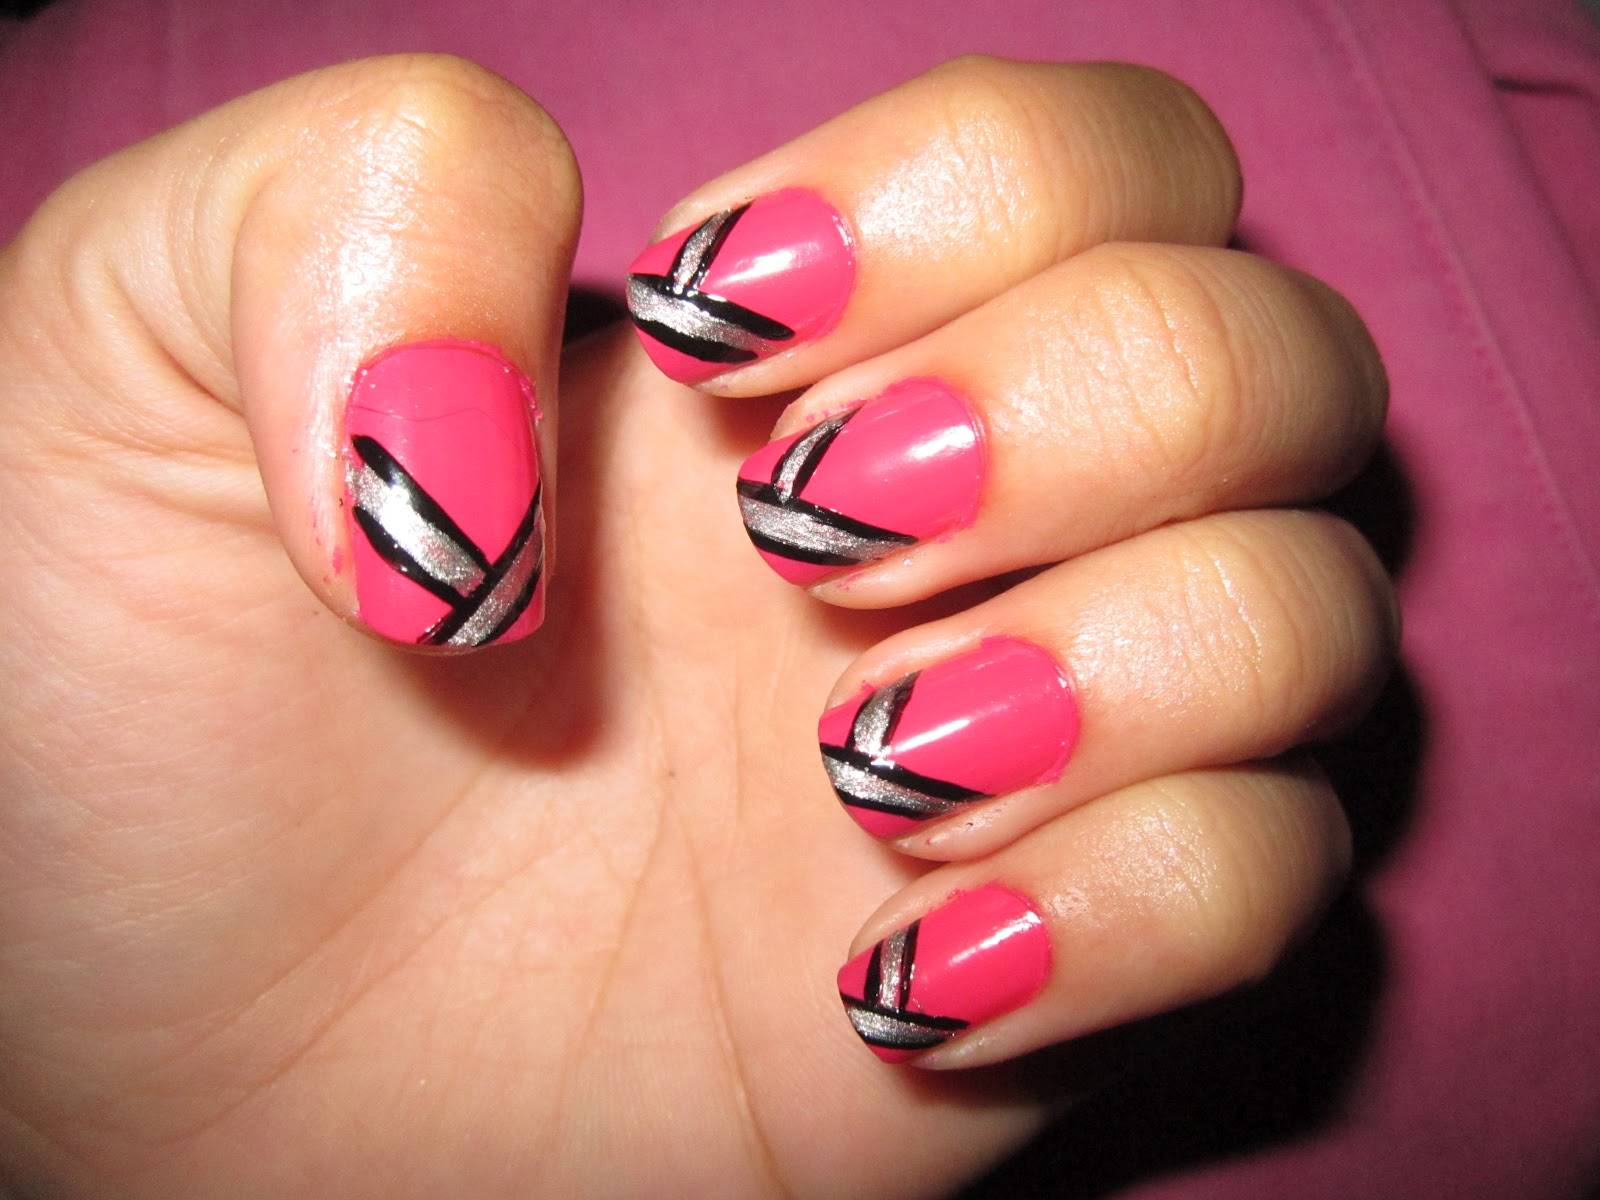 1. Latest Nail Art Designs Gallery - wide 10